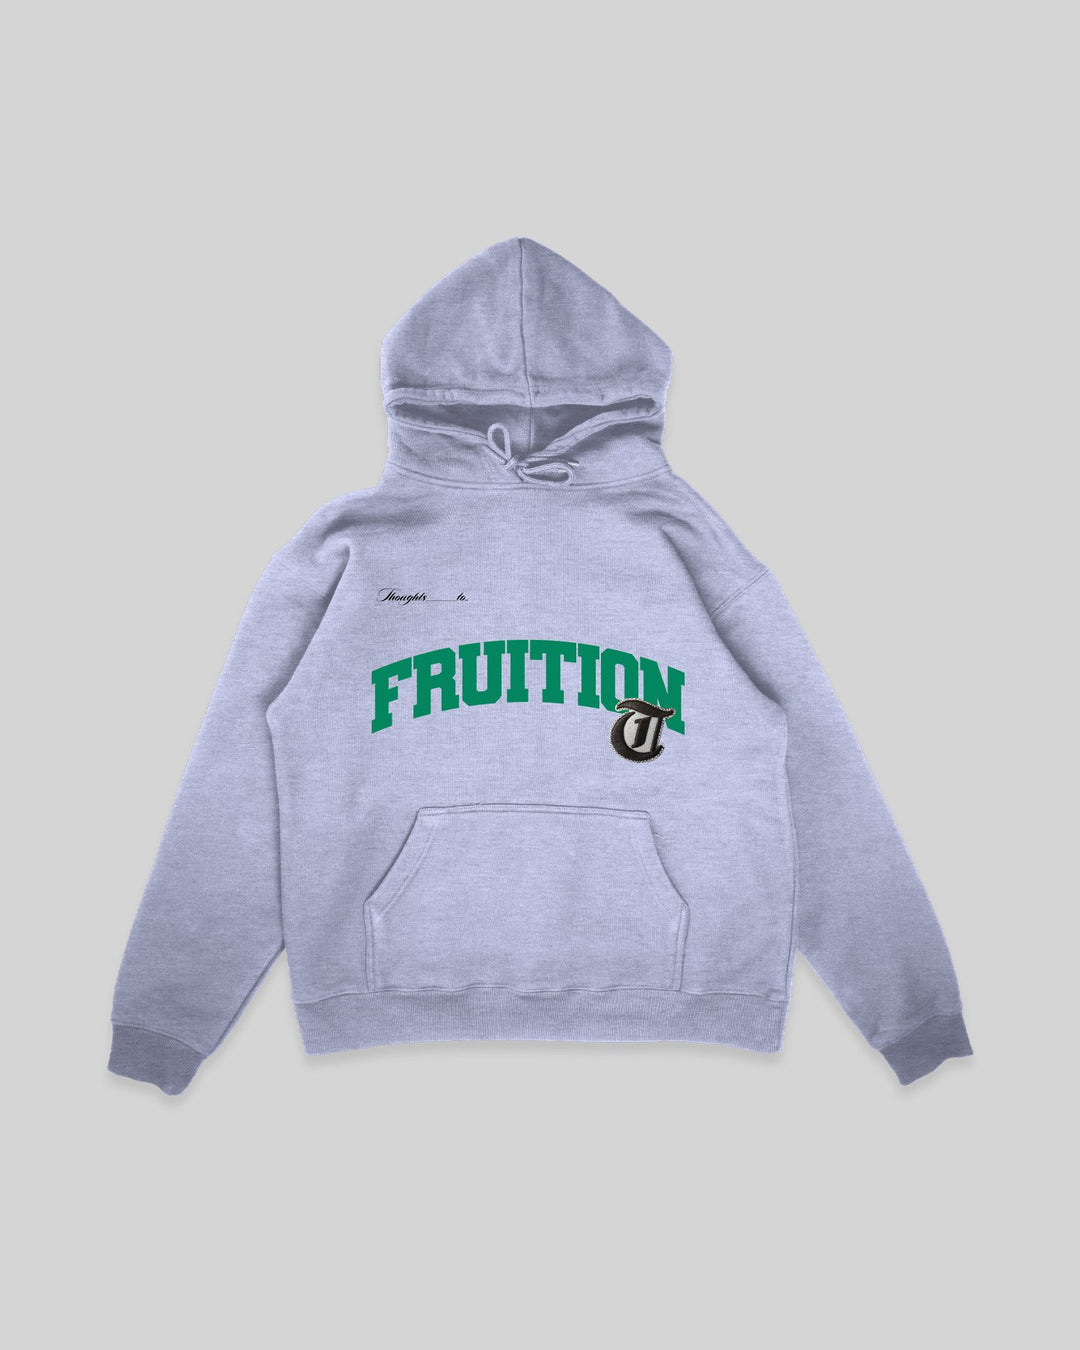 Fruition Applique Grey Hoodie - trainofthoughtcollective